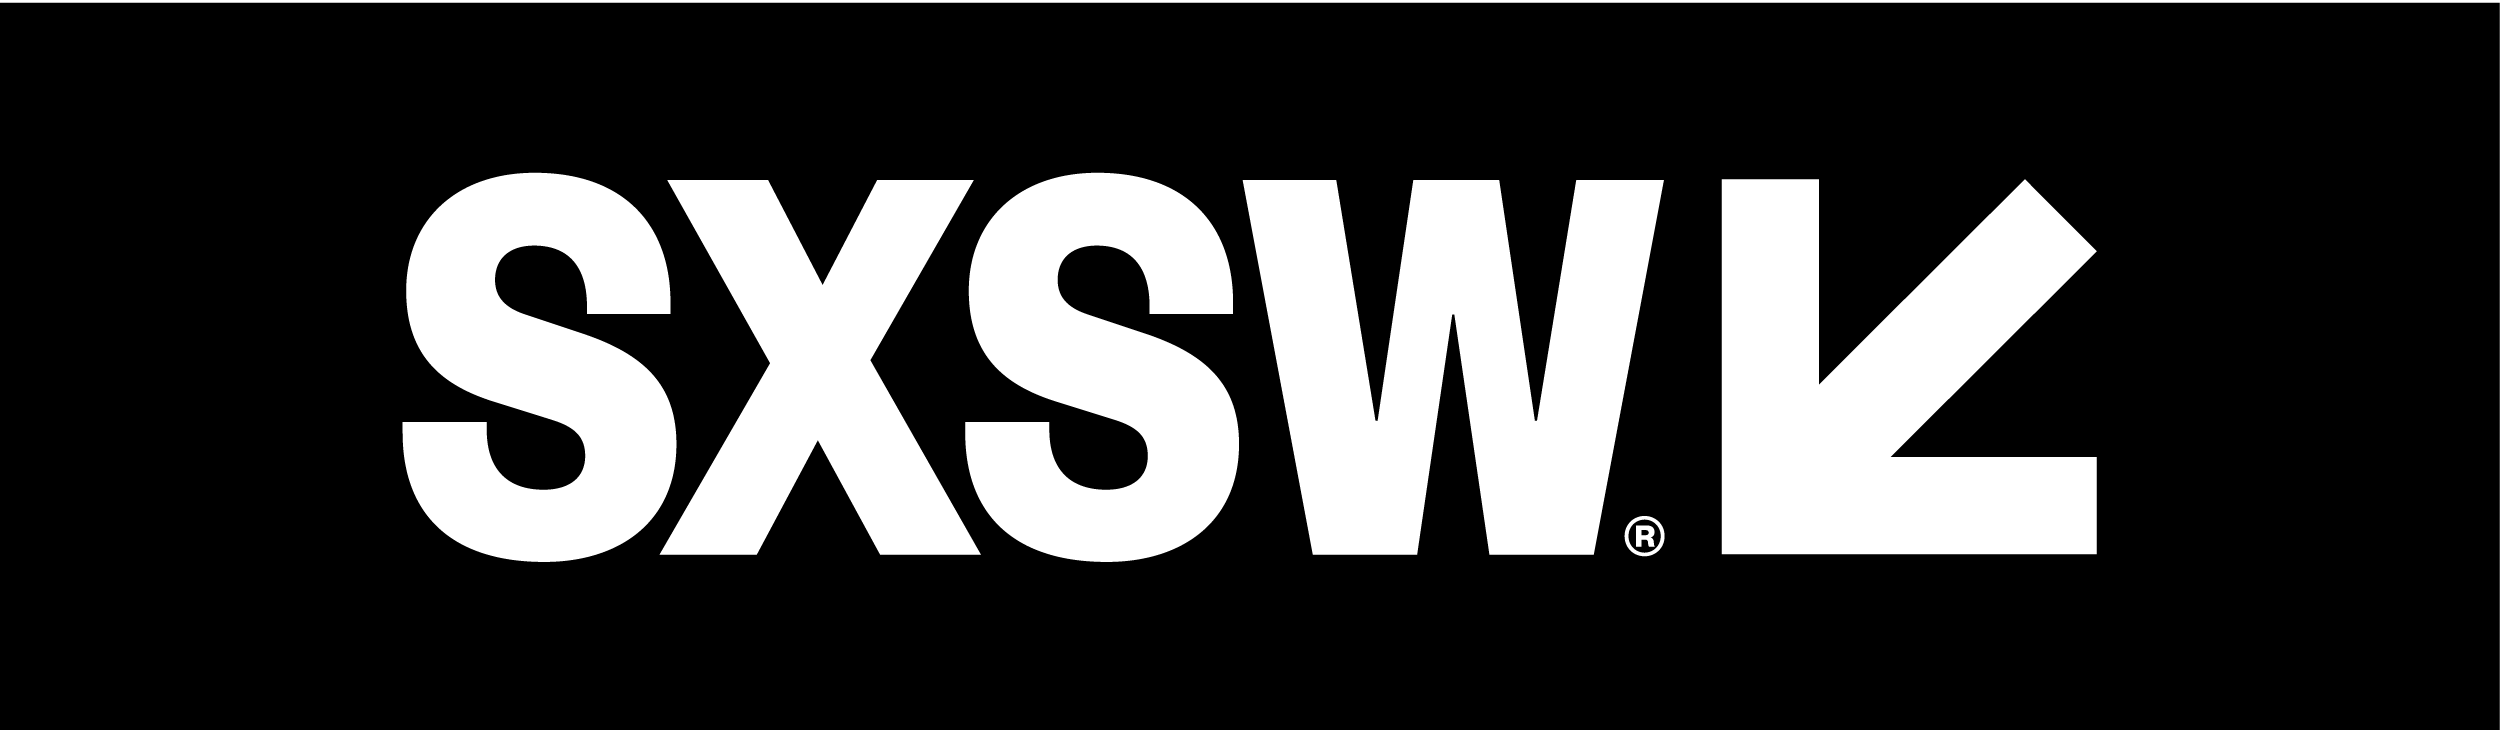 SXSW ANNOUNCES INITIAL KEYNOTE ANDSECOND ROUND OF FEATURED SPEAKERS